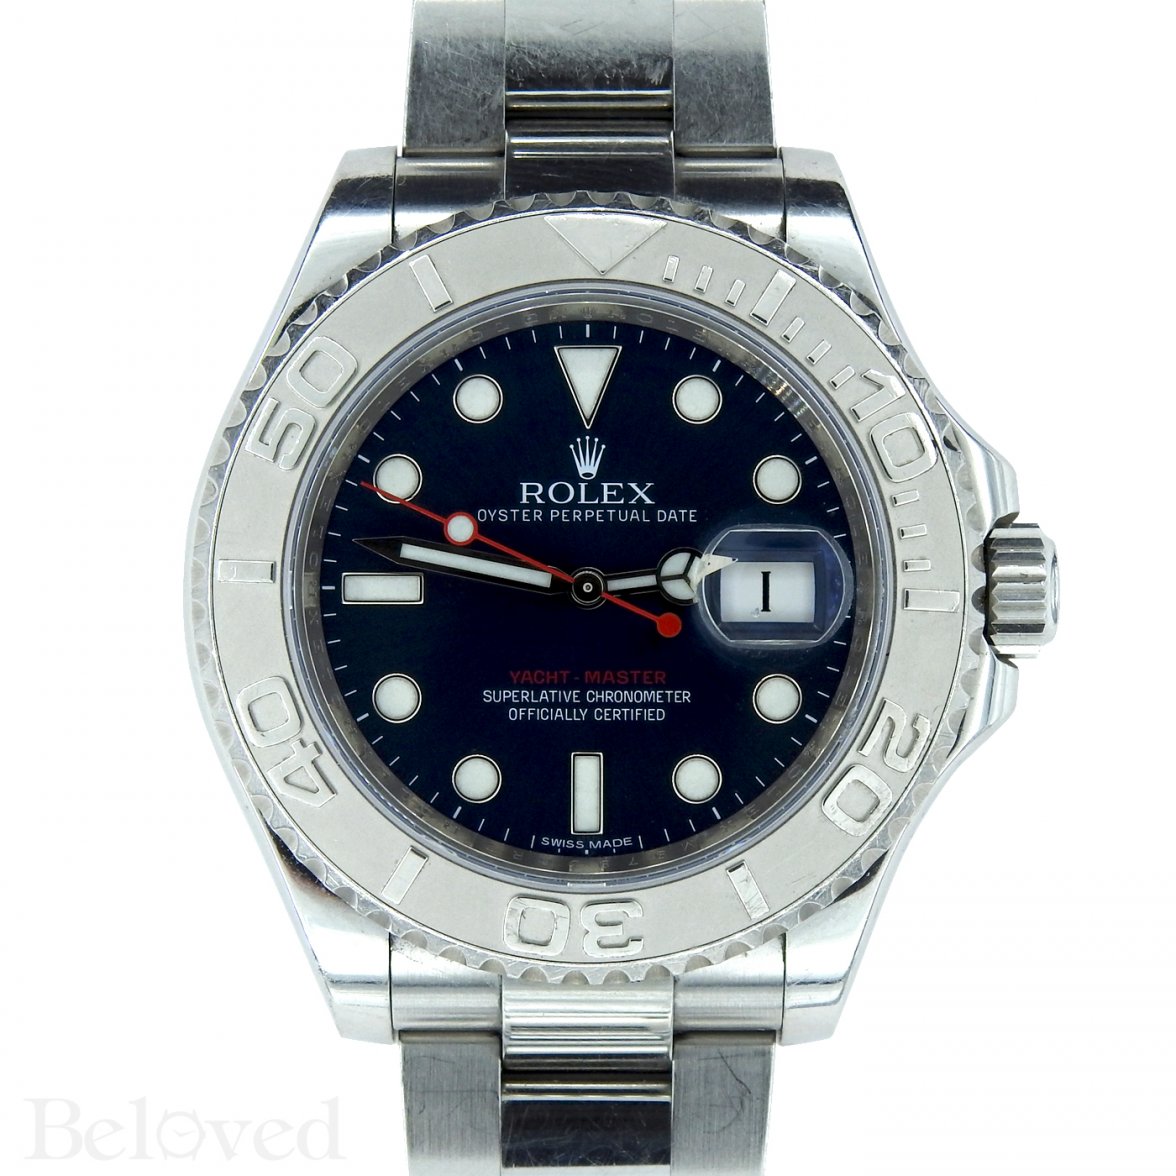 SOLD - Rolex Yacht-Master 116622 Blue Dial Complete | Omega Forums